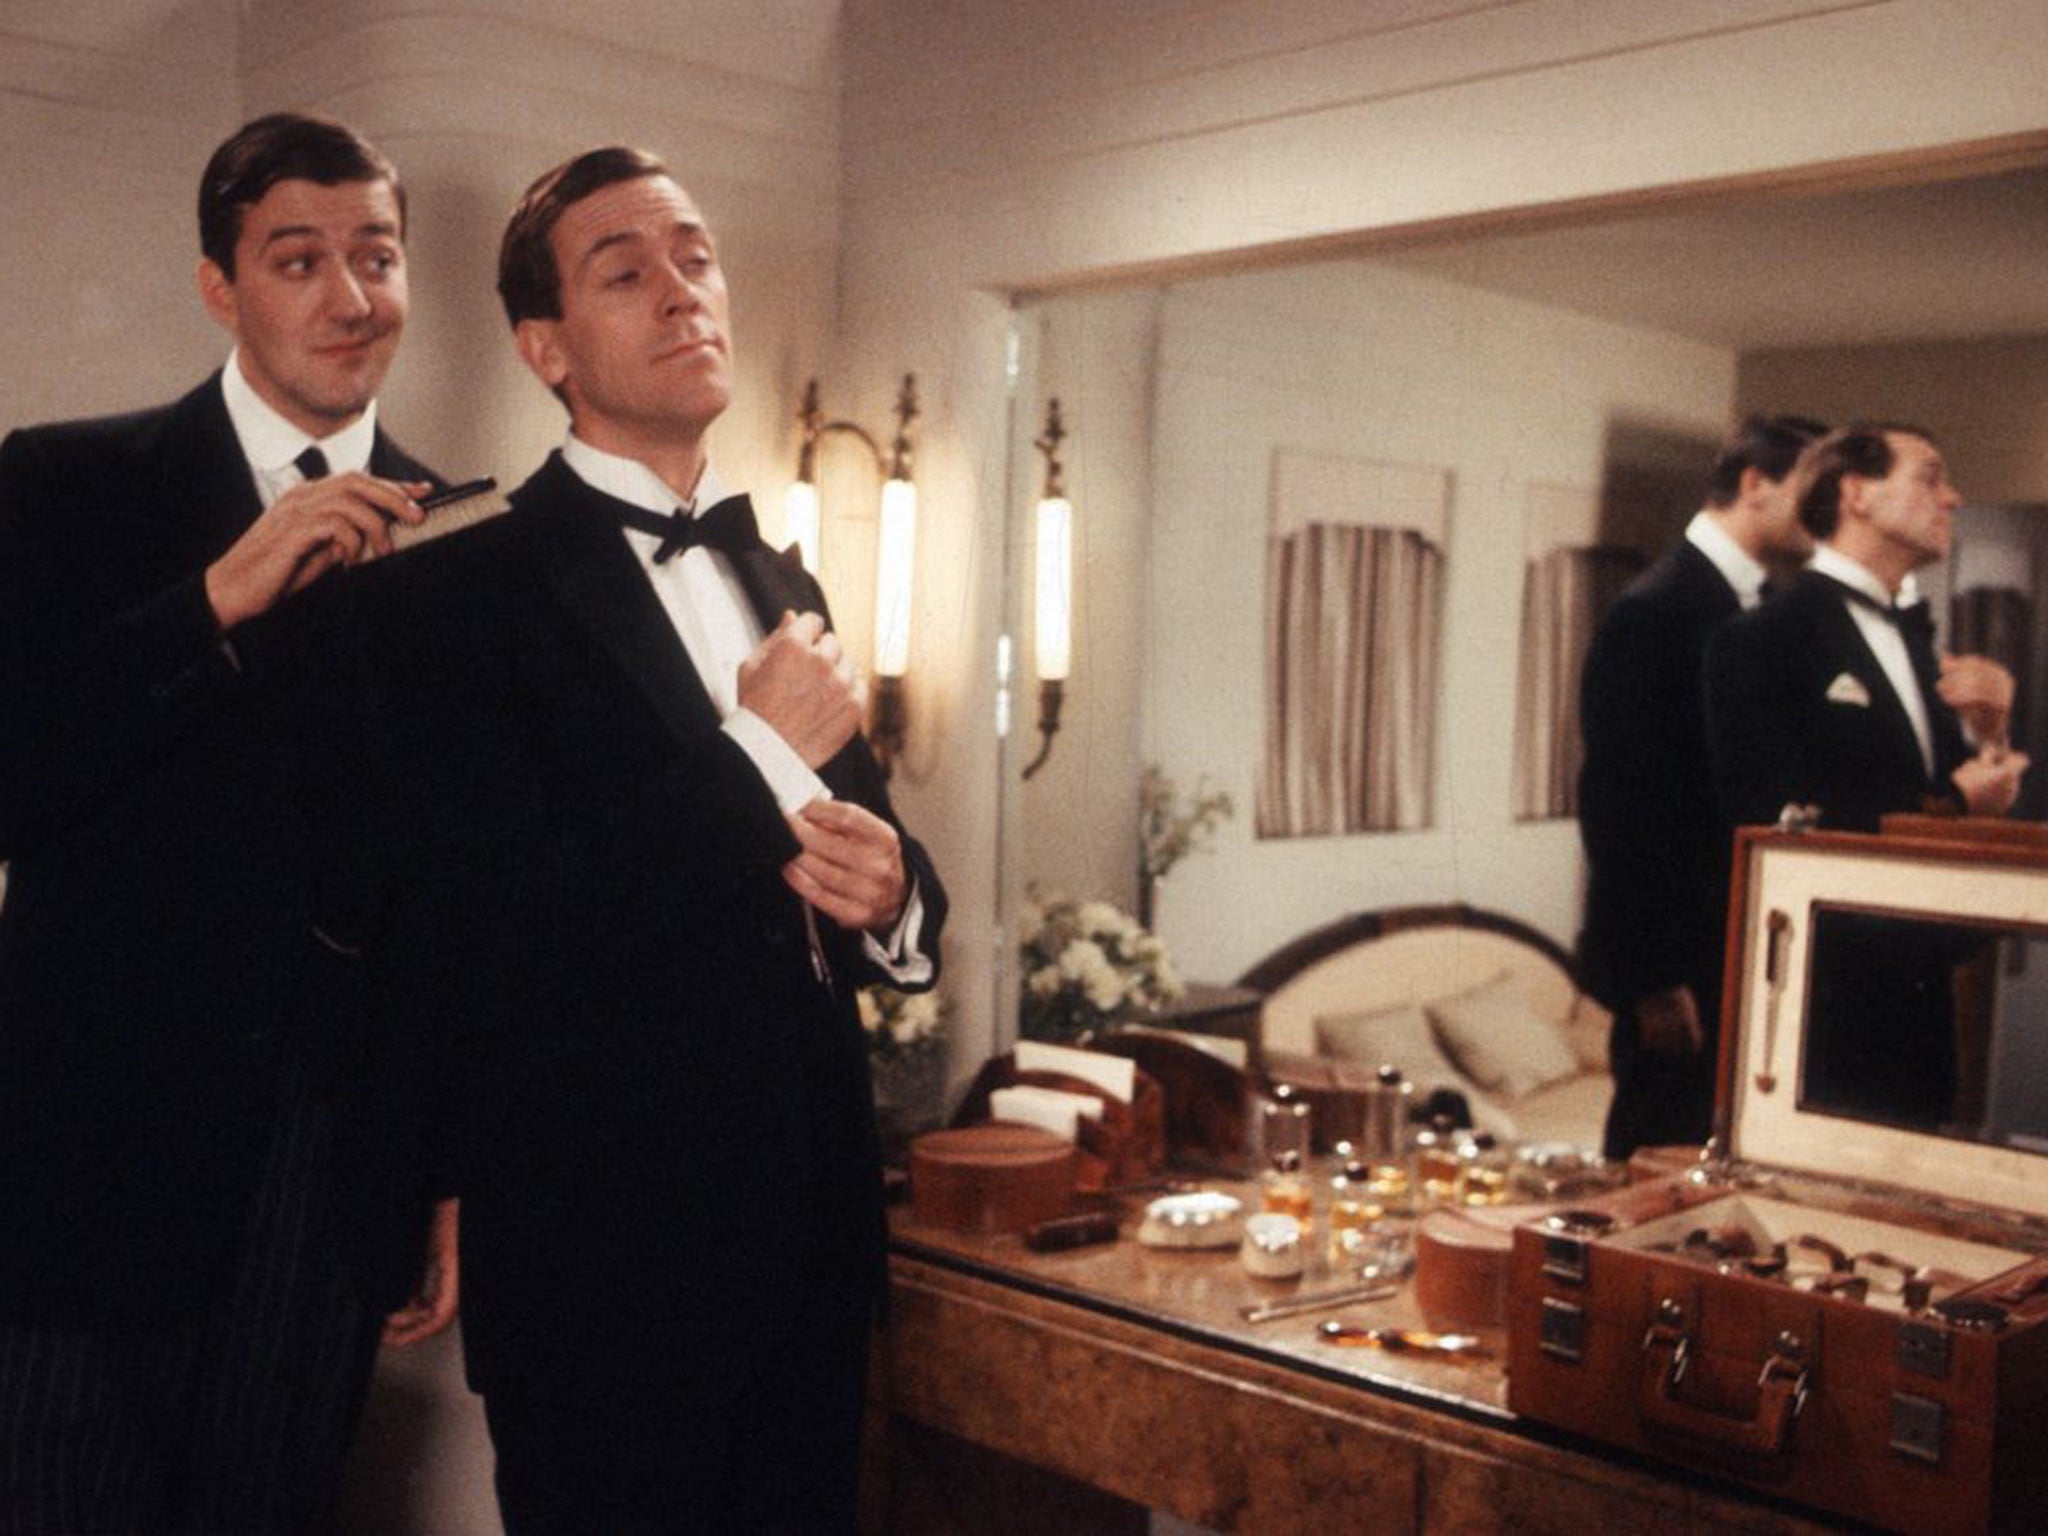 Stephen Fry and Hugh Laurie in Jeeves and Wooster